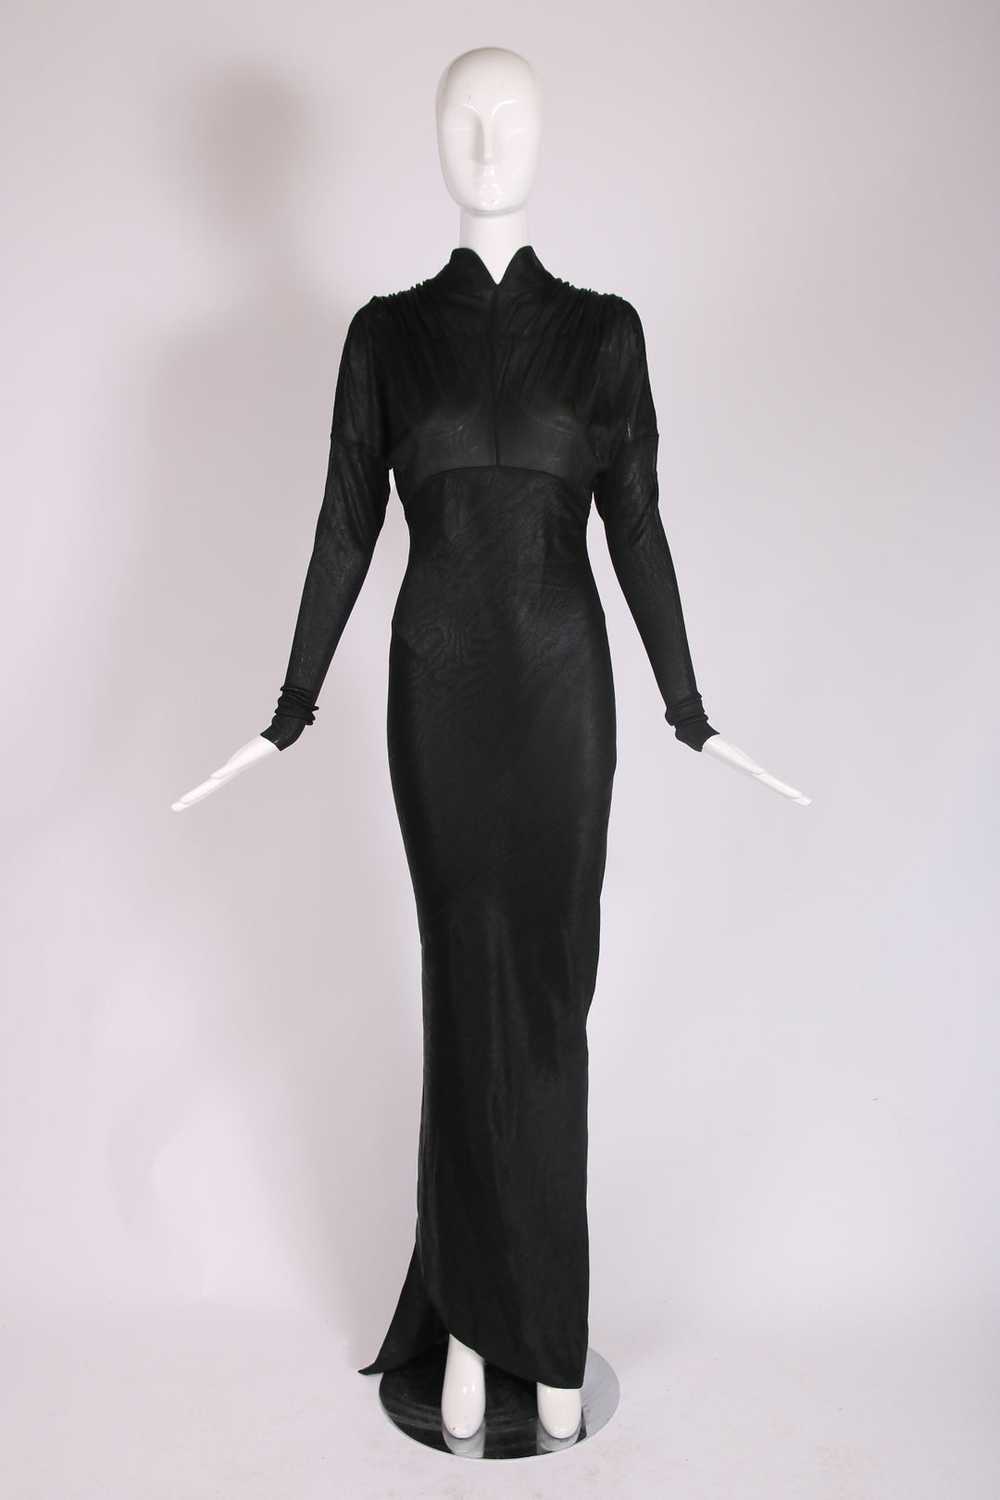 1986 Azzedine Alaia Black Trained Gown - image 2